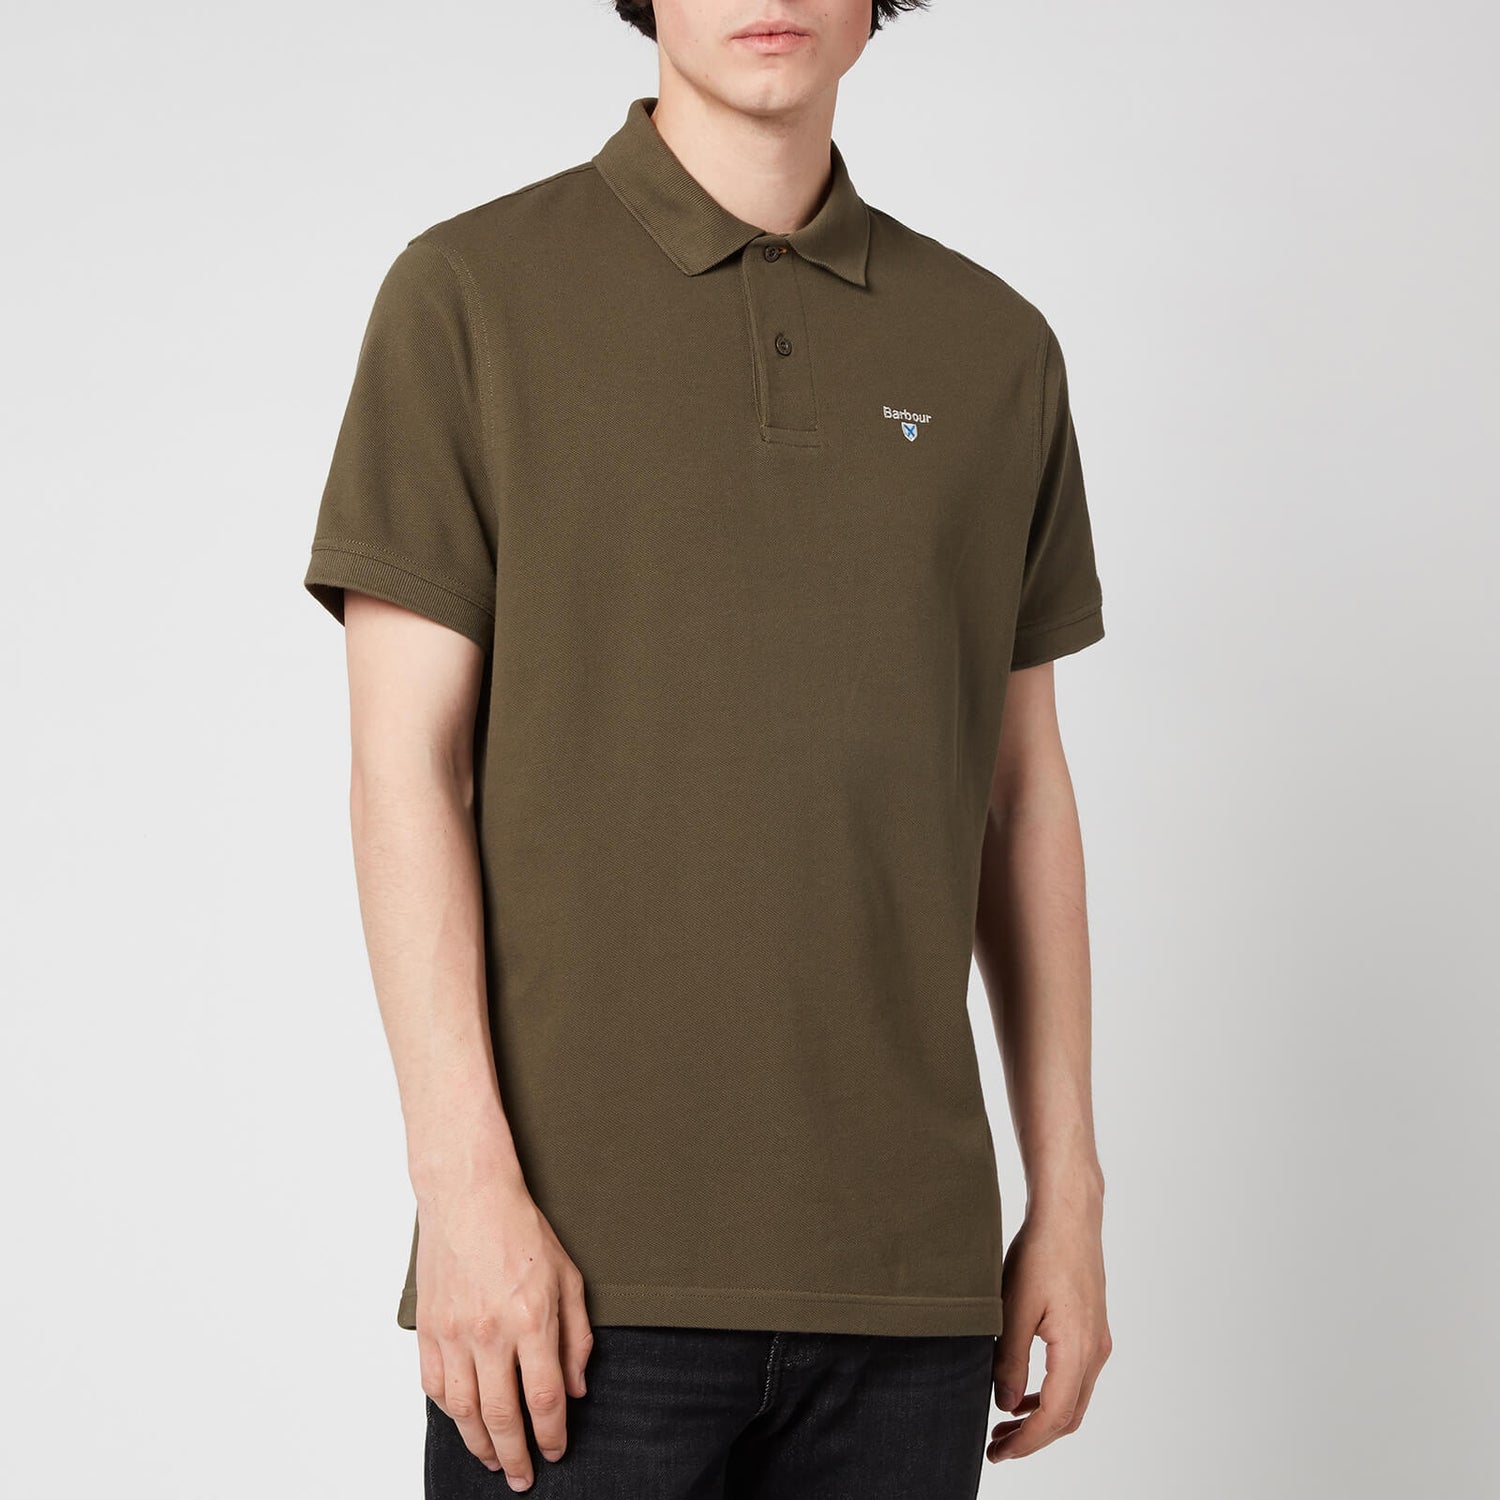 Barbour Men's Sports Polo Shirt - Olive - S